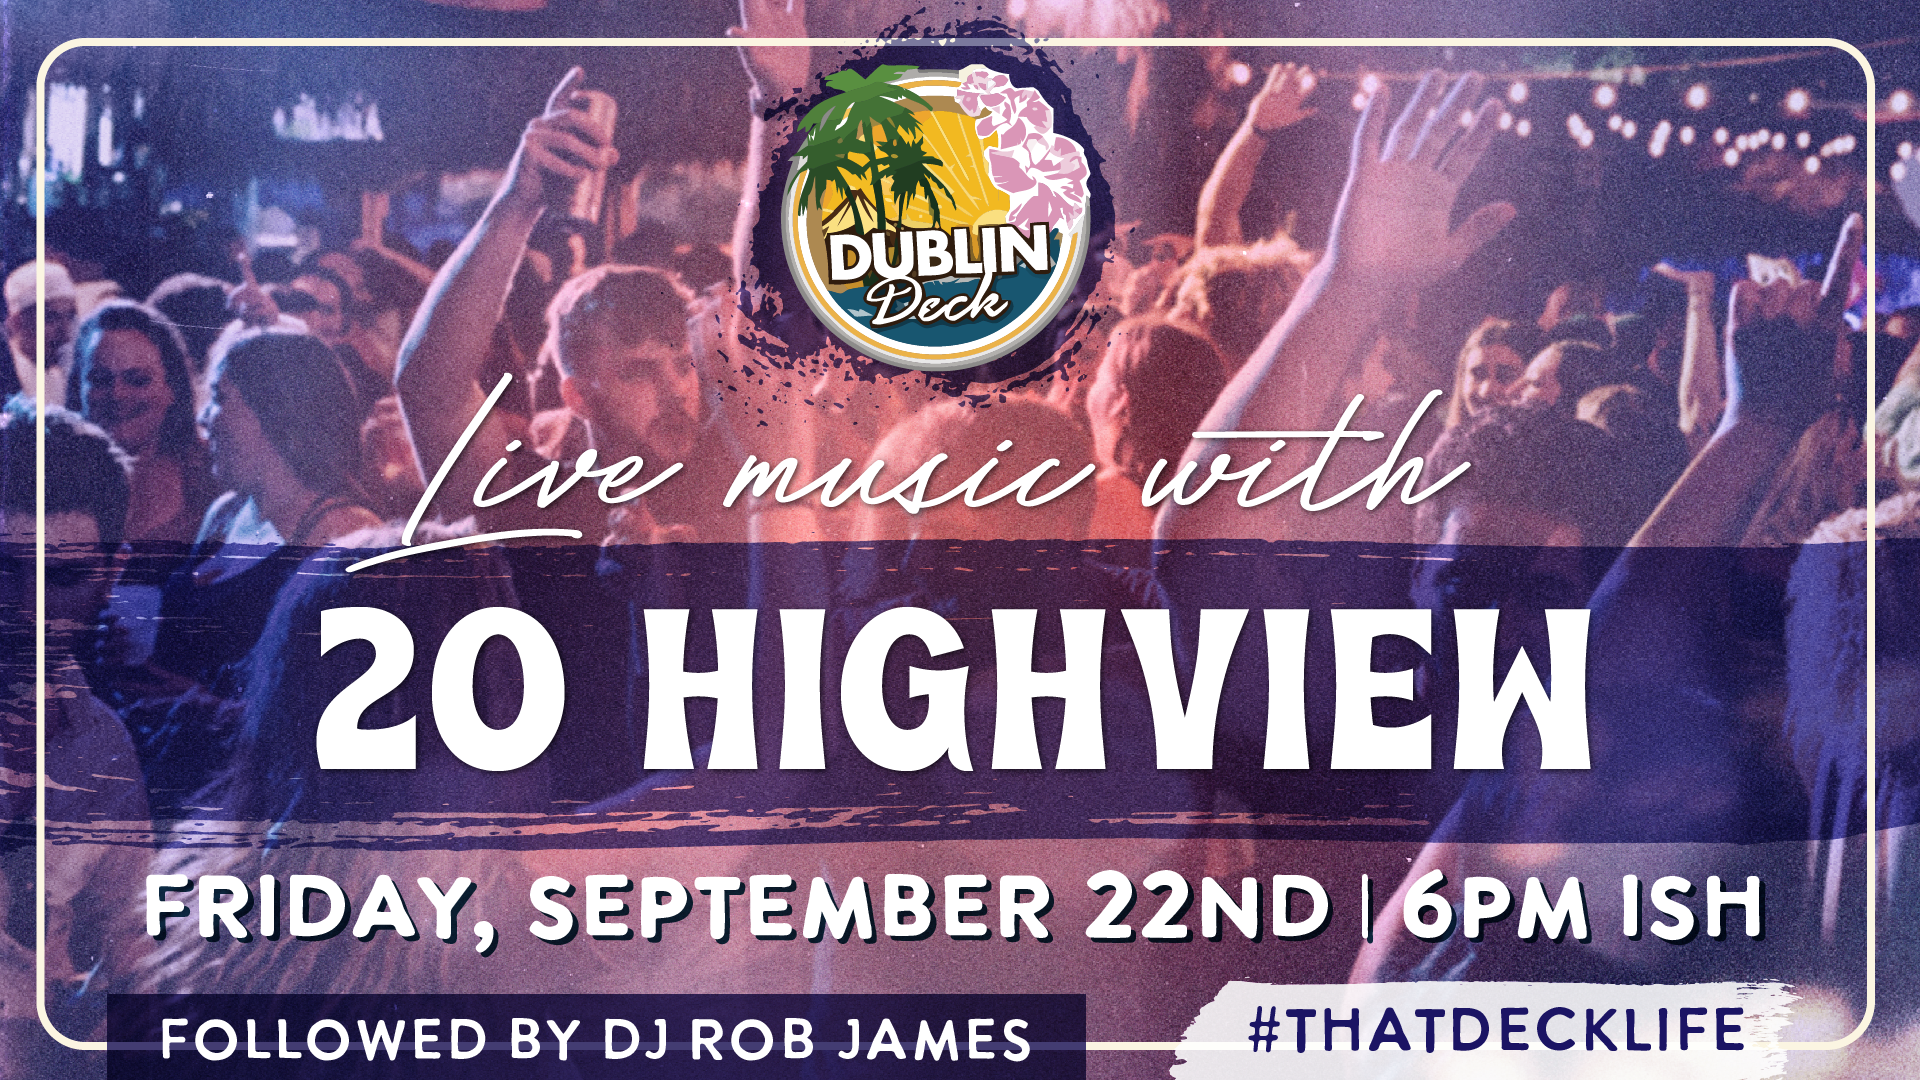 Jam out with 20 Highview at Dublin Deck! Music begins at 6PM-ish